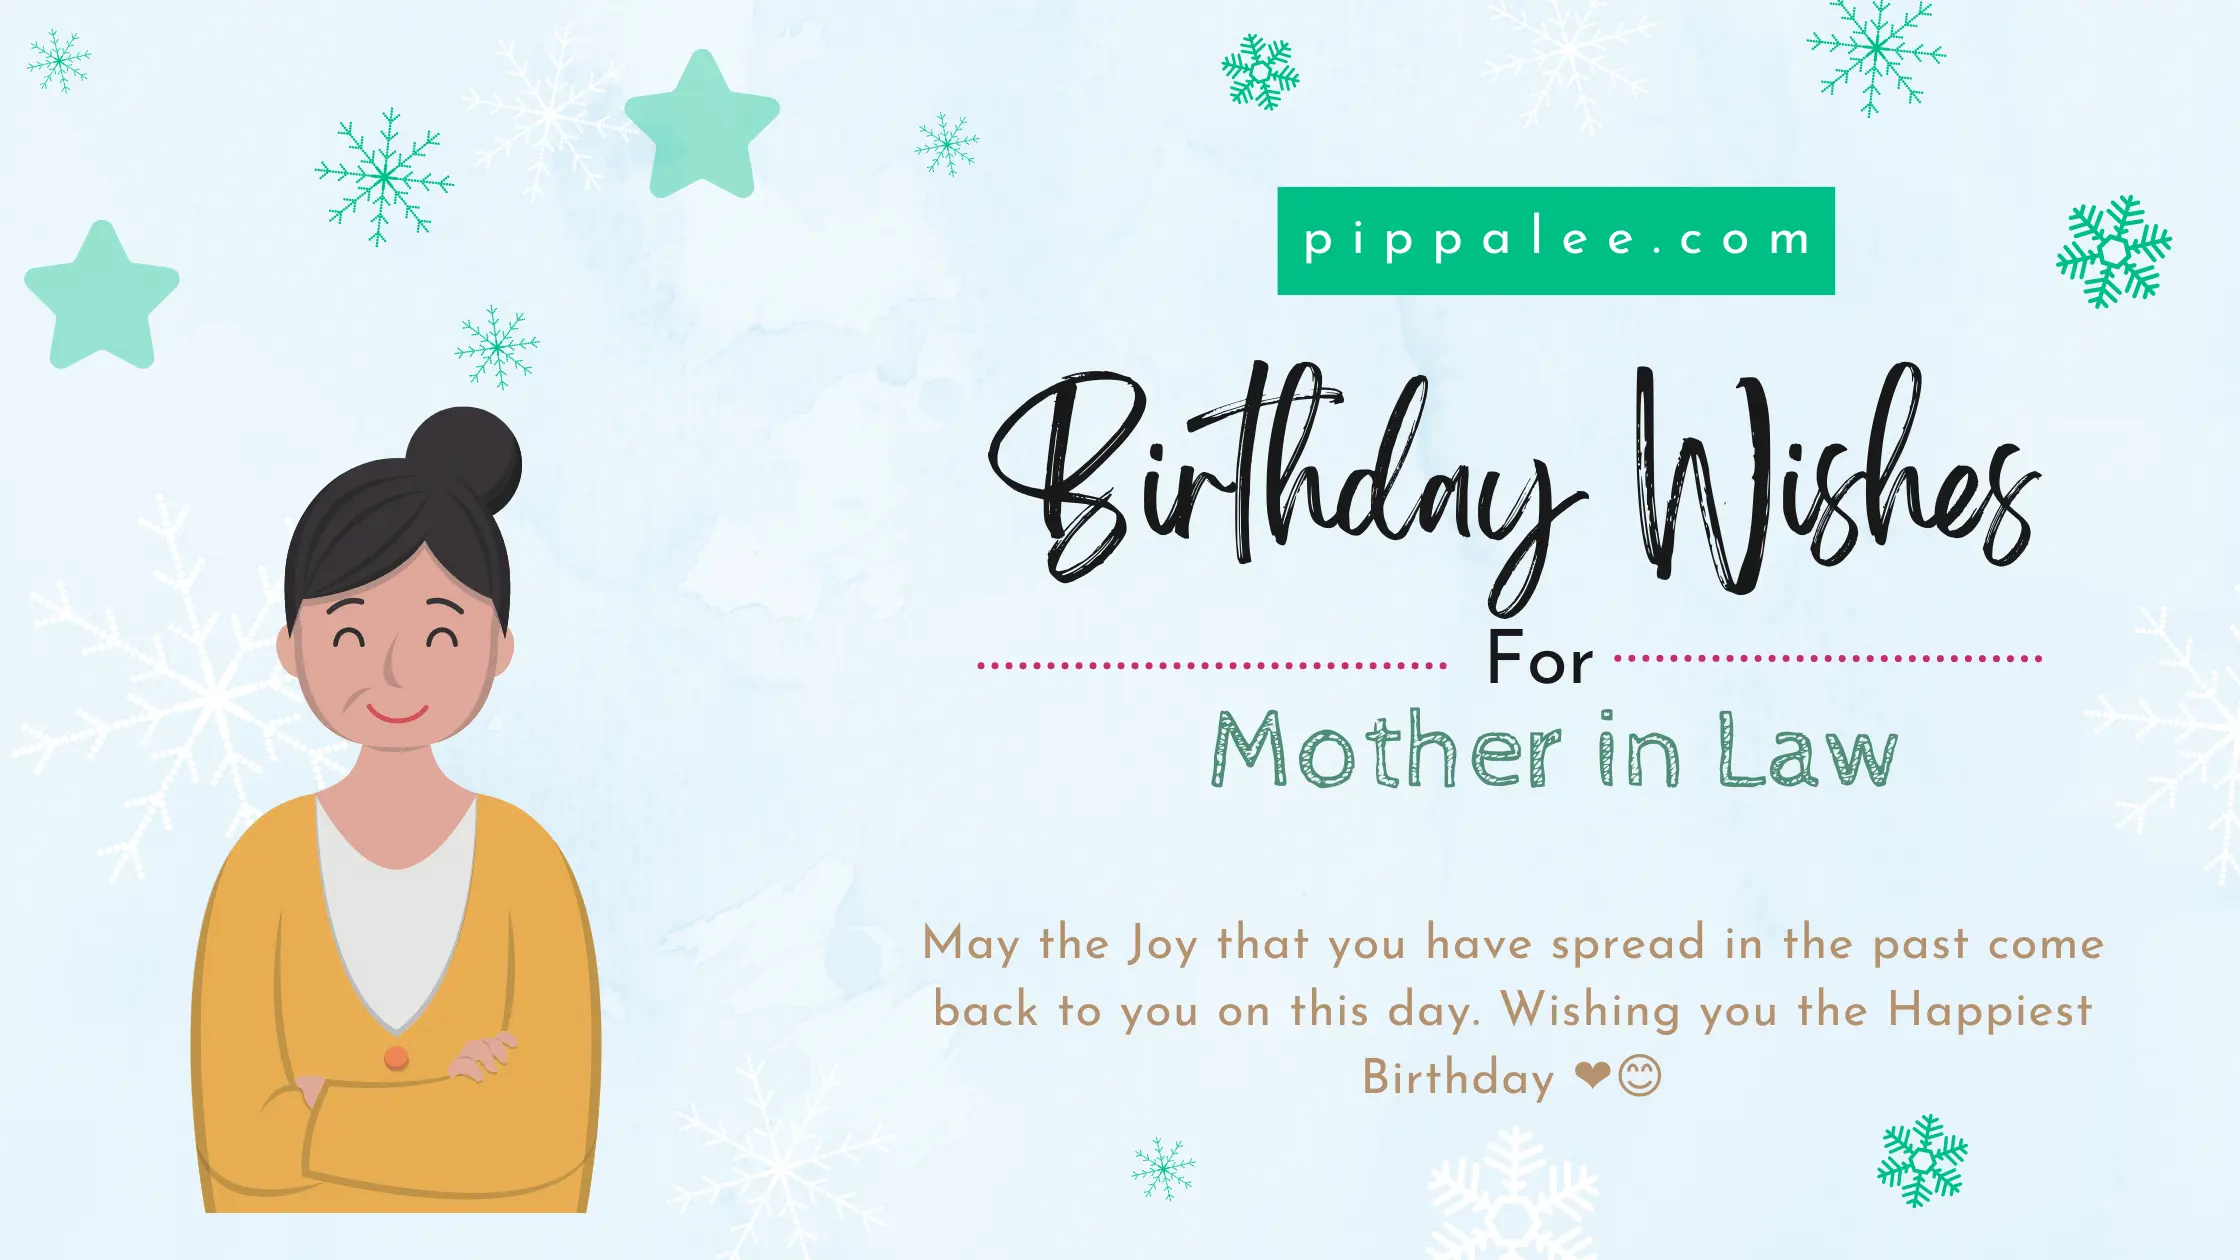 Birthday Wishes For Mother in Law - Wishes & Messages